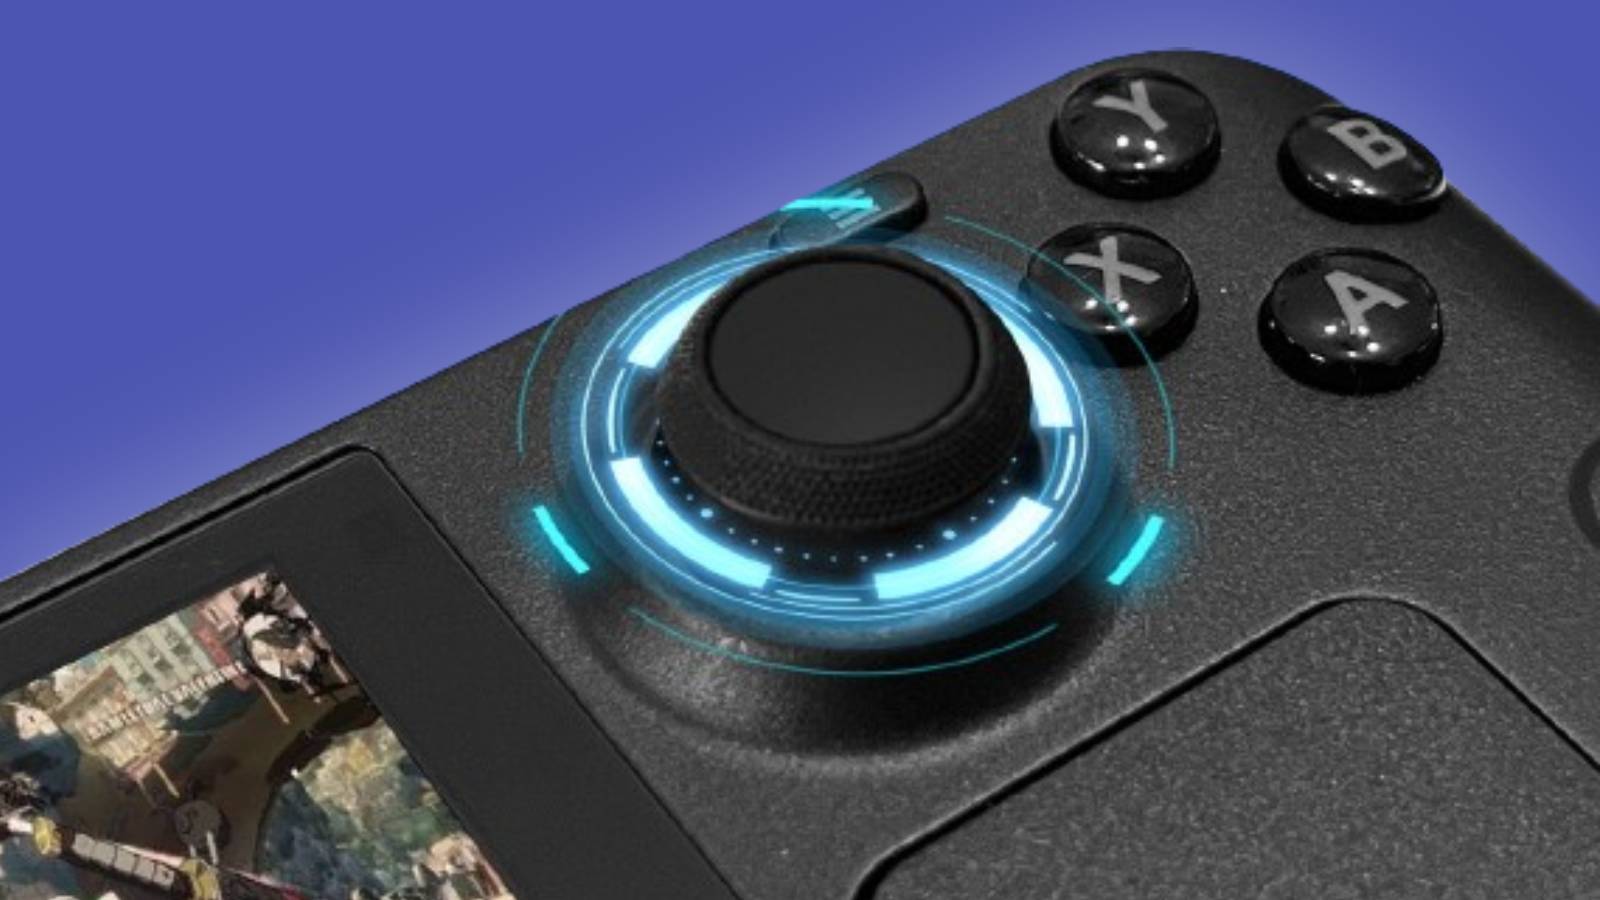 Image from the HandheldDIY Steam Deck IndieGoGo campaign page.